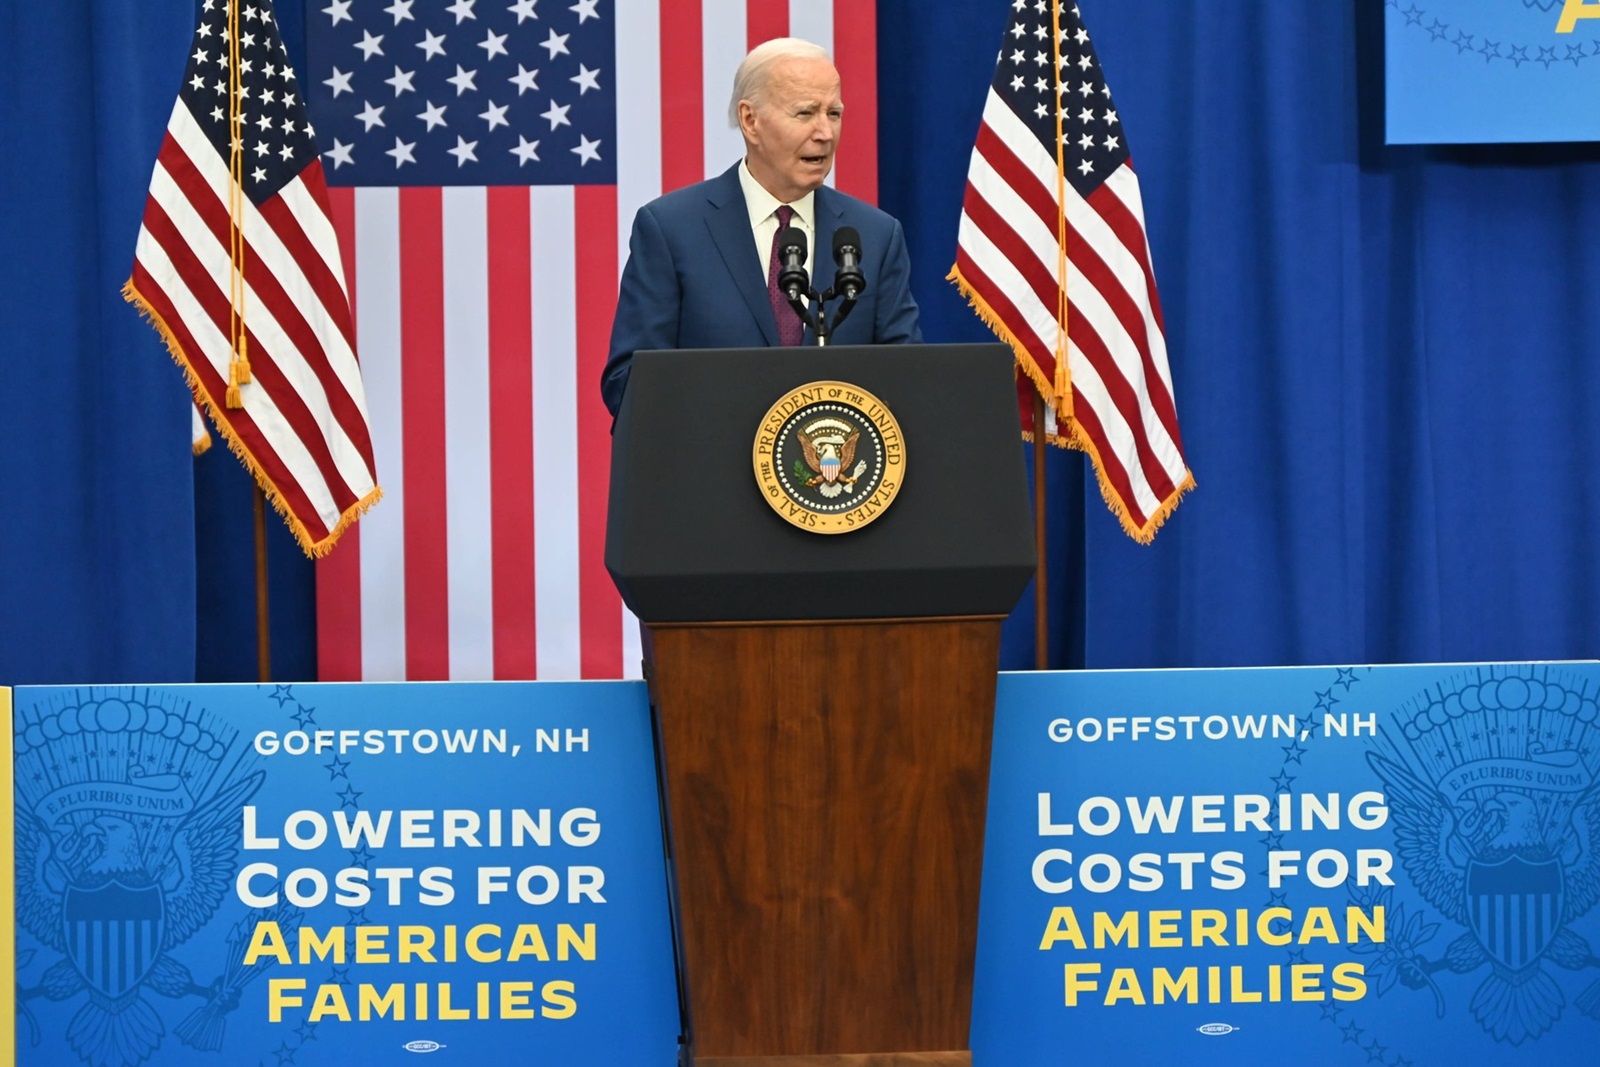 RECORD DATE NOT STATED U.S. President Joe Biden Remarks In Goffstown New Hampshire NEW President of the United States Joe Biden delivers remarks on lowering costs for American families and delivers his vision in contrast to Former U.S. President Donald J. Trump at the YMCA Allard Center in Goffstown, New Hampshire. March 11, 2024, Goffstown, New Hampshire, USA: President of the United States Joe Biden delivers remarks on lowering costs for American families and delivers his vision in contrast to Former U.S. President Donald J. Trump at the YMCA Allard Center in Goffstown, New Hampshire. Credit: /TheNews2 Foto: /Thenews2/imago images U.S. President Joe Biden Remarks In Goffstown New Hampshire Copyright: xKylexMazzax,Image: 855972205, License: Rights-managed, Restrictions: imago is entitled to issue a simple usage license at the time of provision. Personality and trademark rights as well as copyright laws regarding art-works shown must be observed. Commercial use at your own risk.;PUBLICATIONxNOTxINxUSA, Credit images as "Profimedia/ IMAGO", Model Release: no, Credit line: Kyle Mazza / imago stock&people / Profimedia